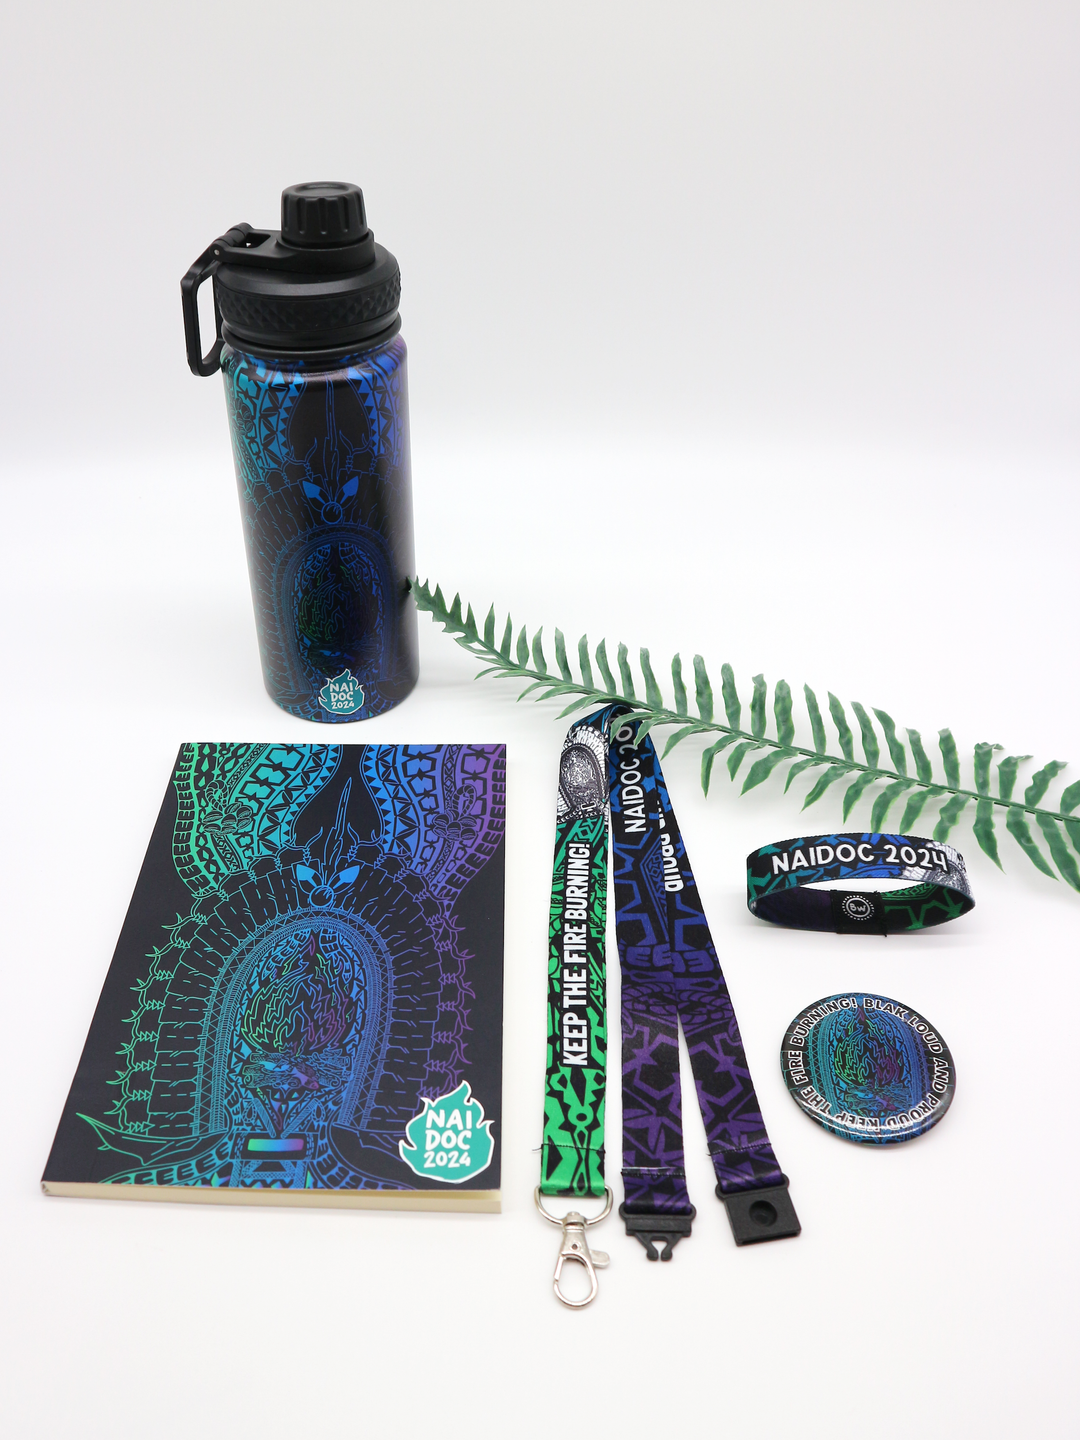 Keep The Fire Burning! Blak, Loud and Proud - NAIDOC 2024 Accessories Bundle